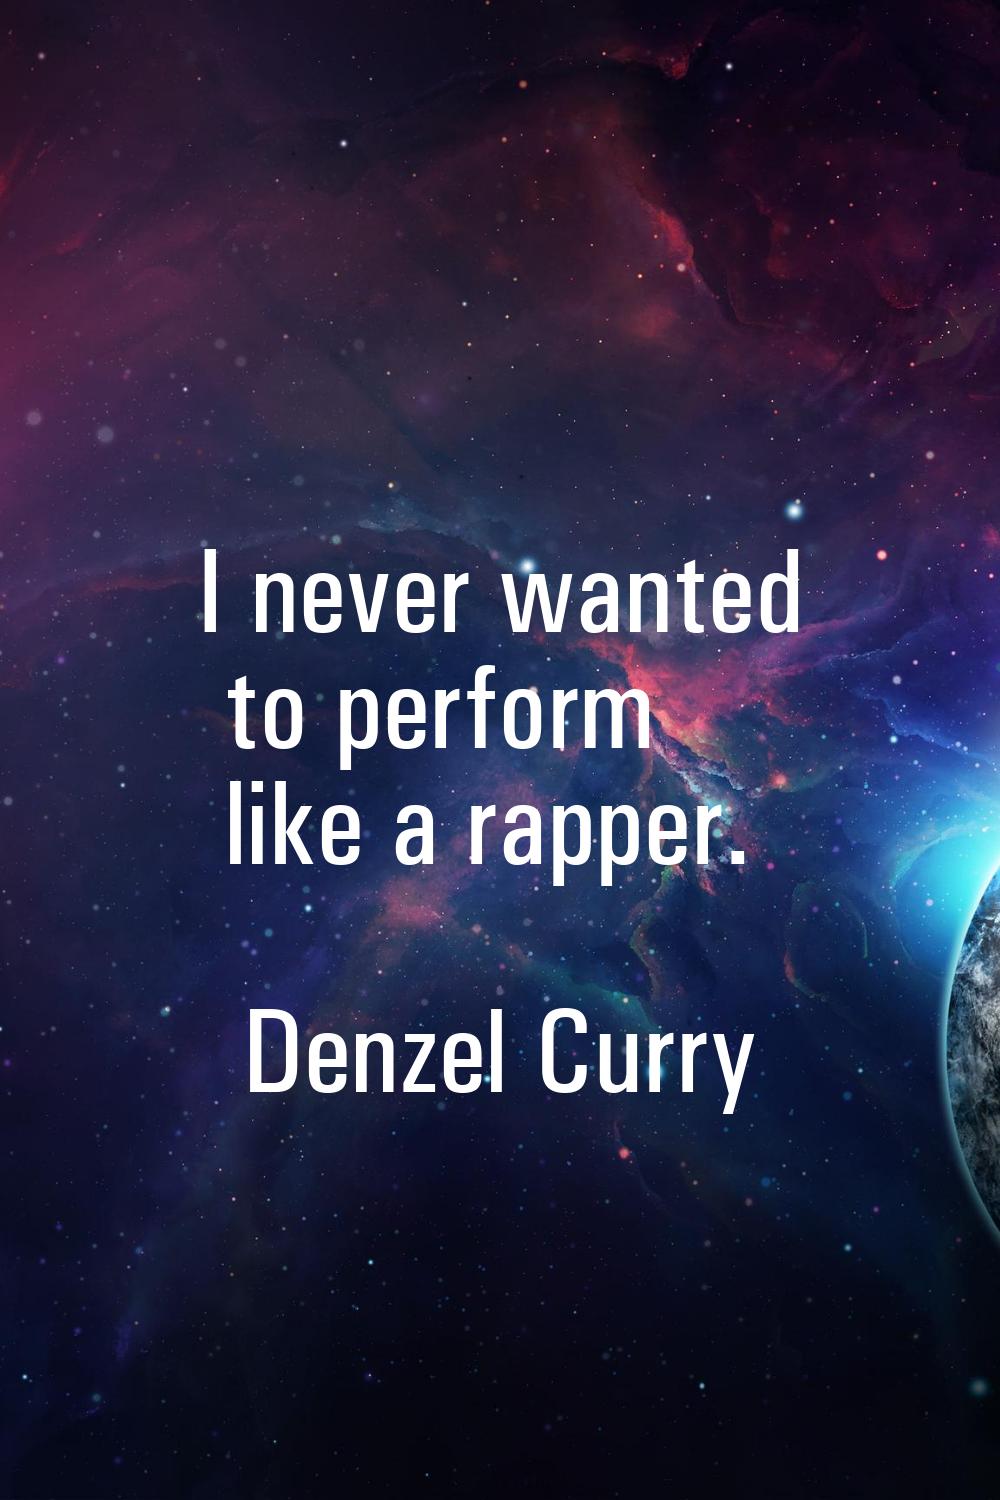 I never wanted to perform like a rapper.